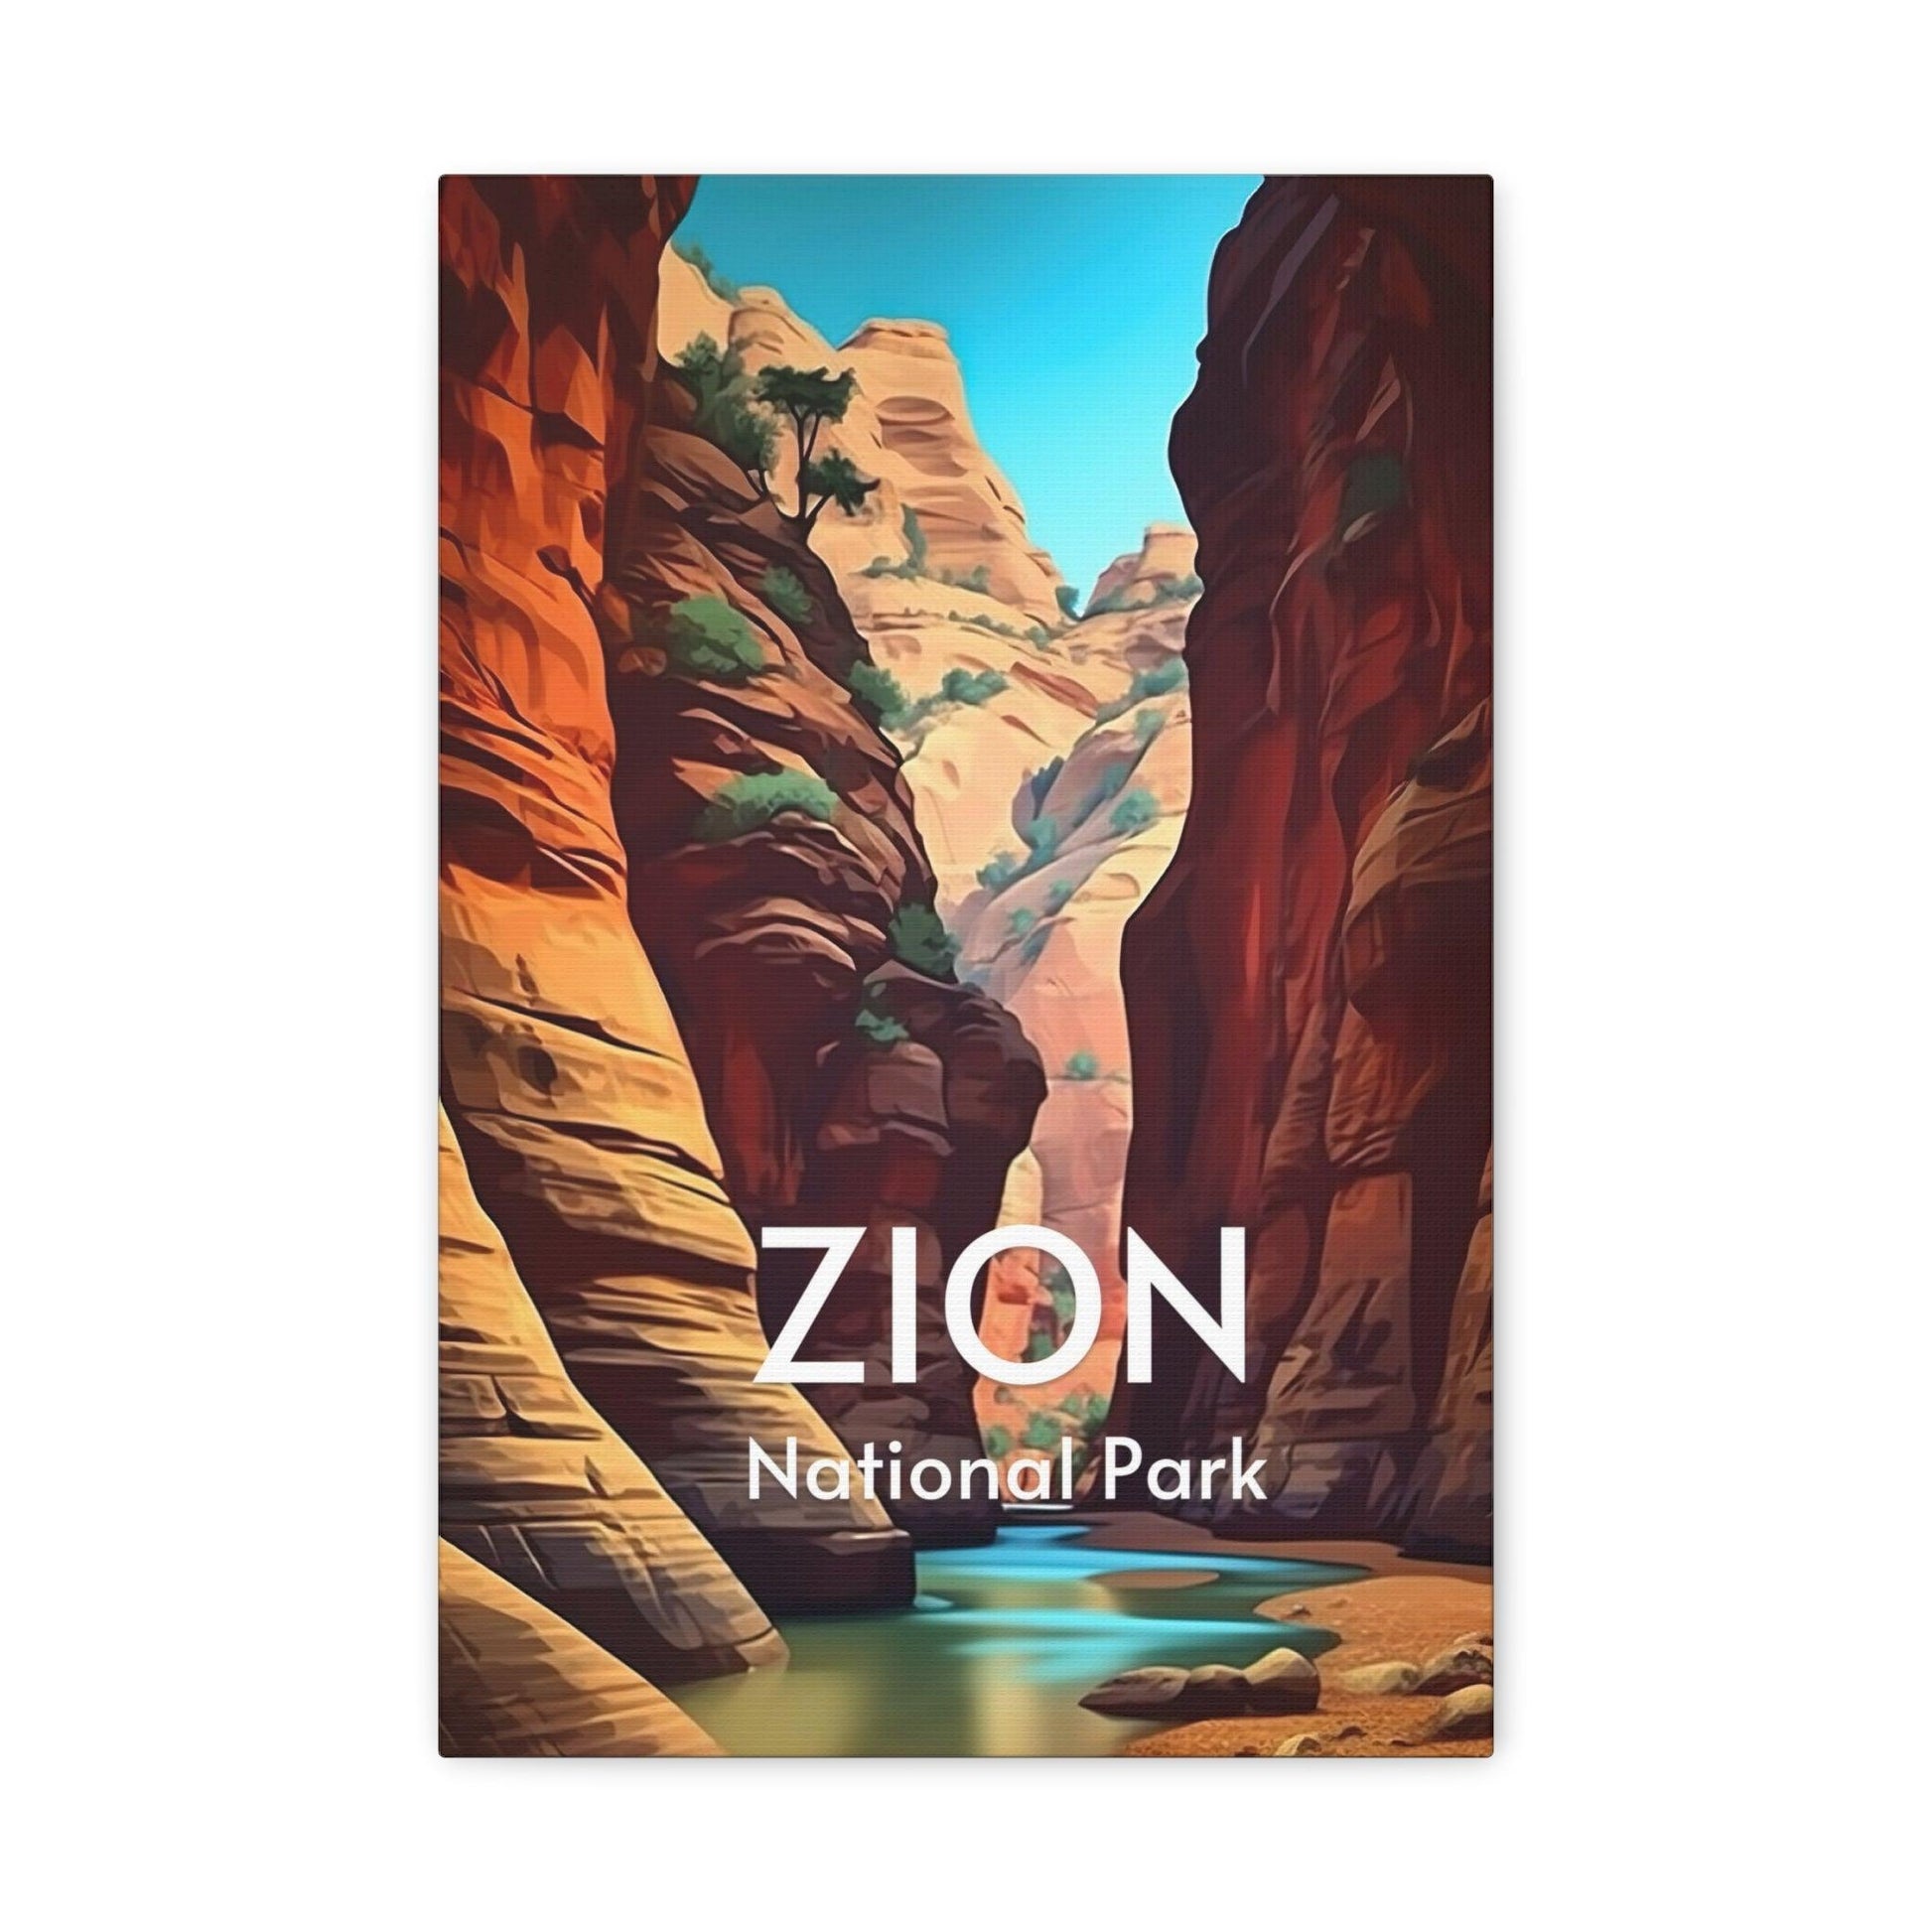 Zion National Park Print, The Narrows hike